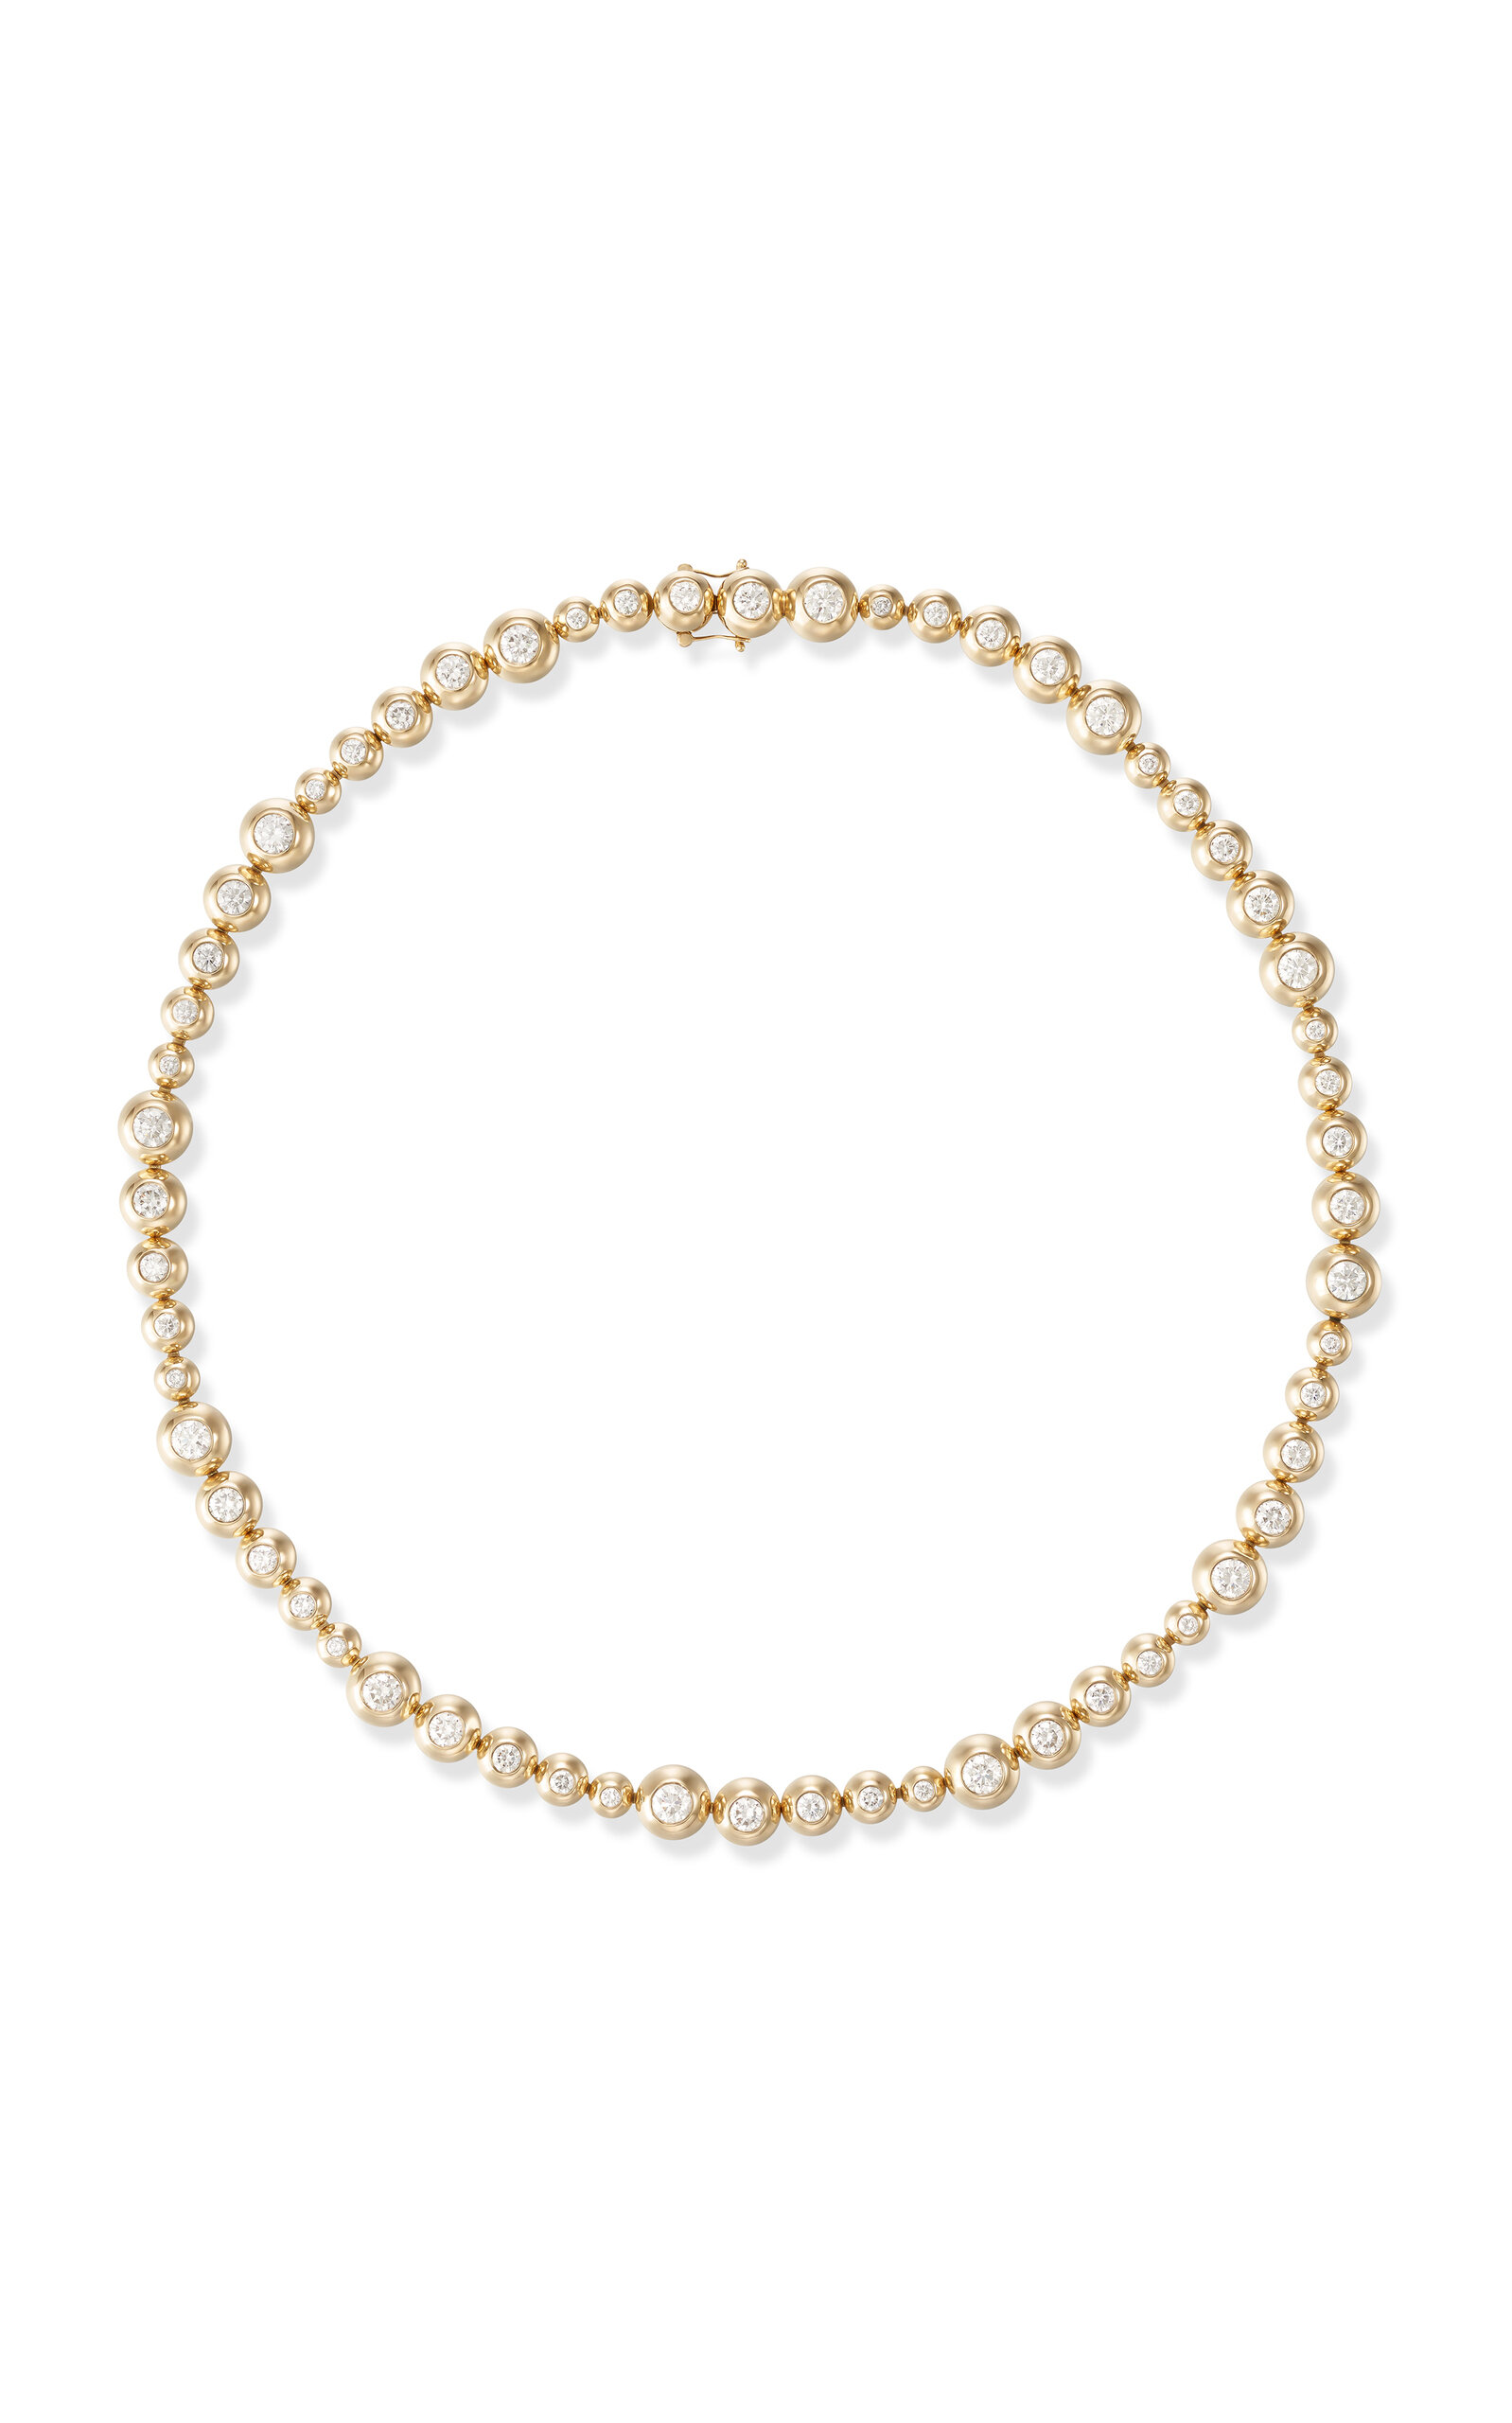 Melissa Kaye 18k Yellow Gold Audrey Graduated Repeating Necklace